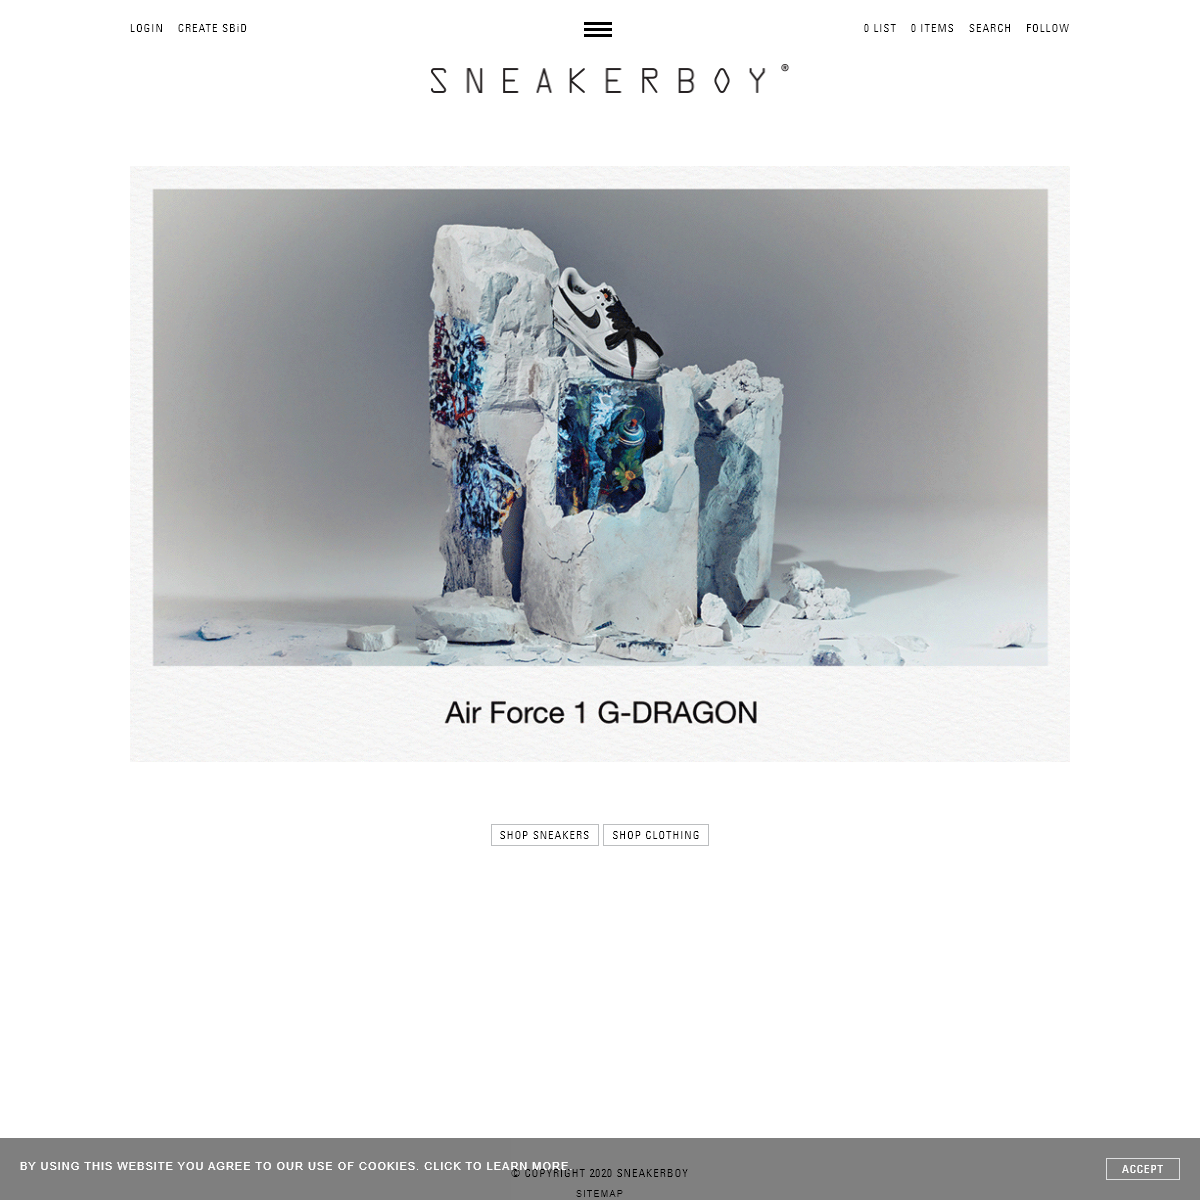 A complete backup of sneakerboy.com